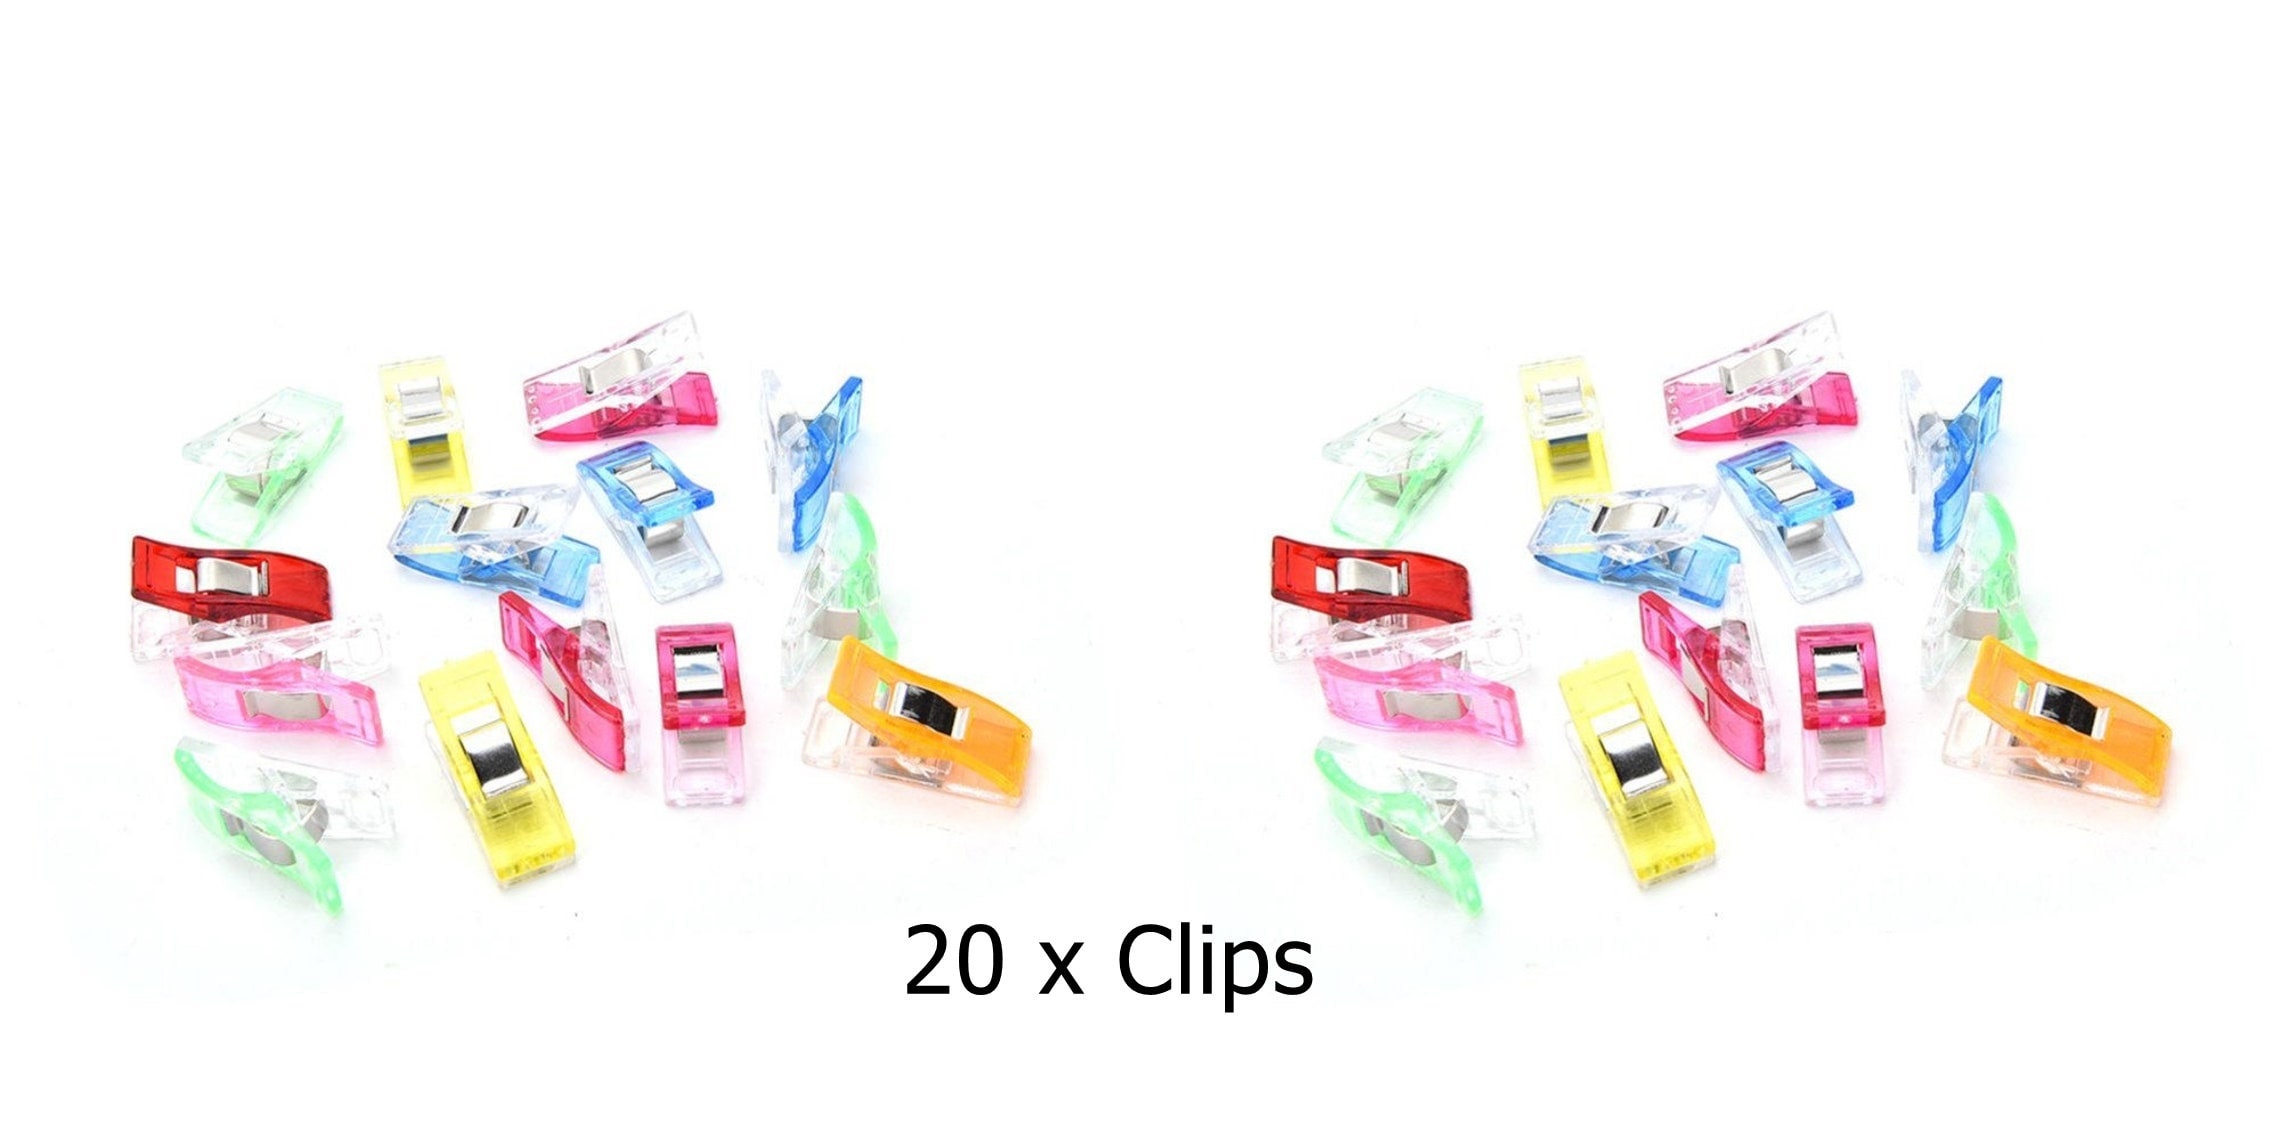 50 Sewing Clips, Quilting Clips, Pattern Clips, 50 Clips, 50 Mini Sewing  Clips, Fabric Clips for Sewing, Fabric Clips 